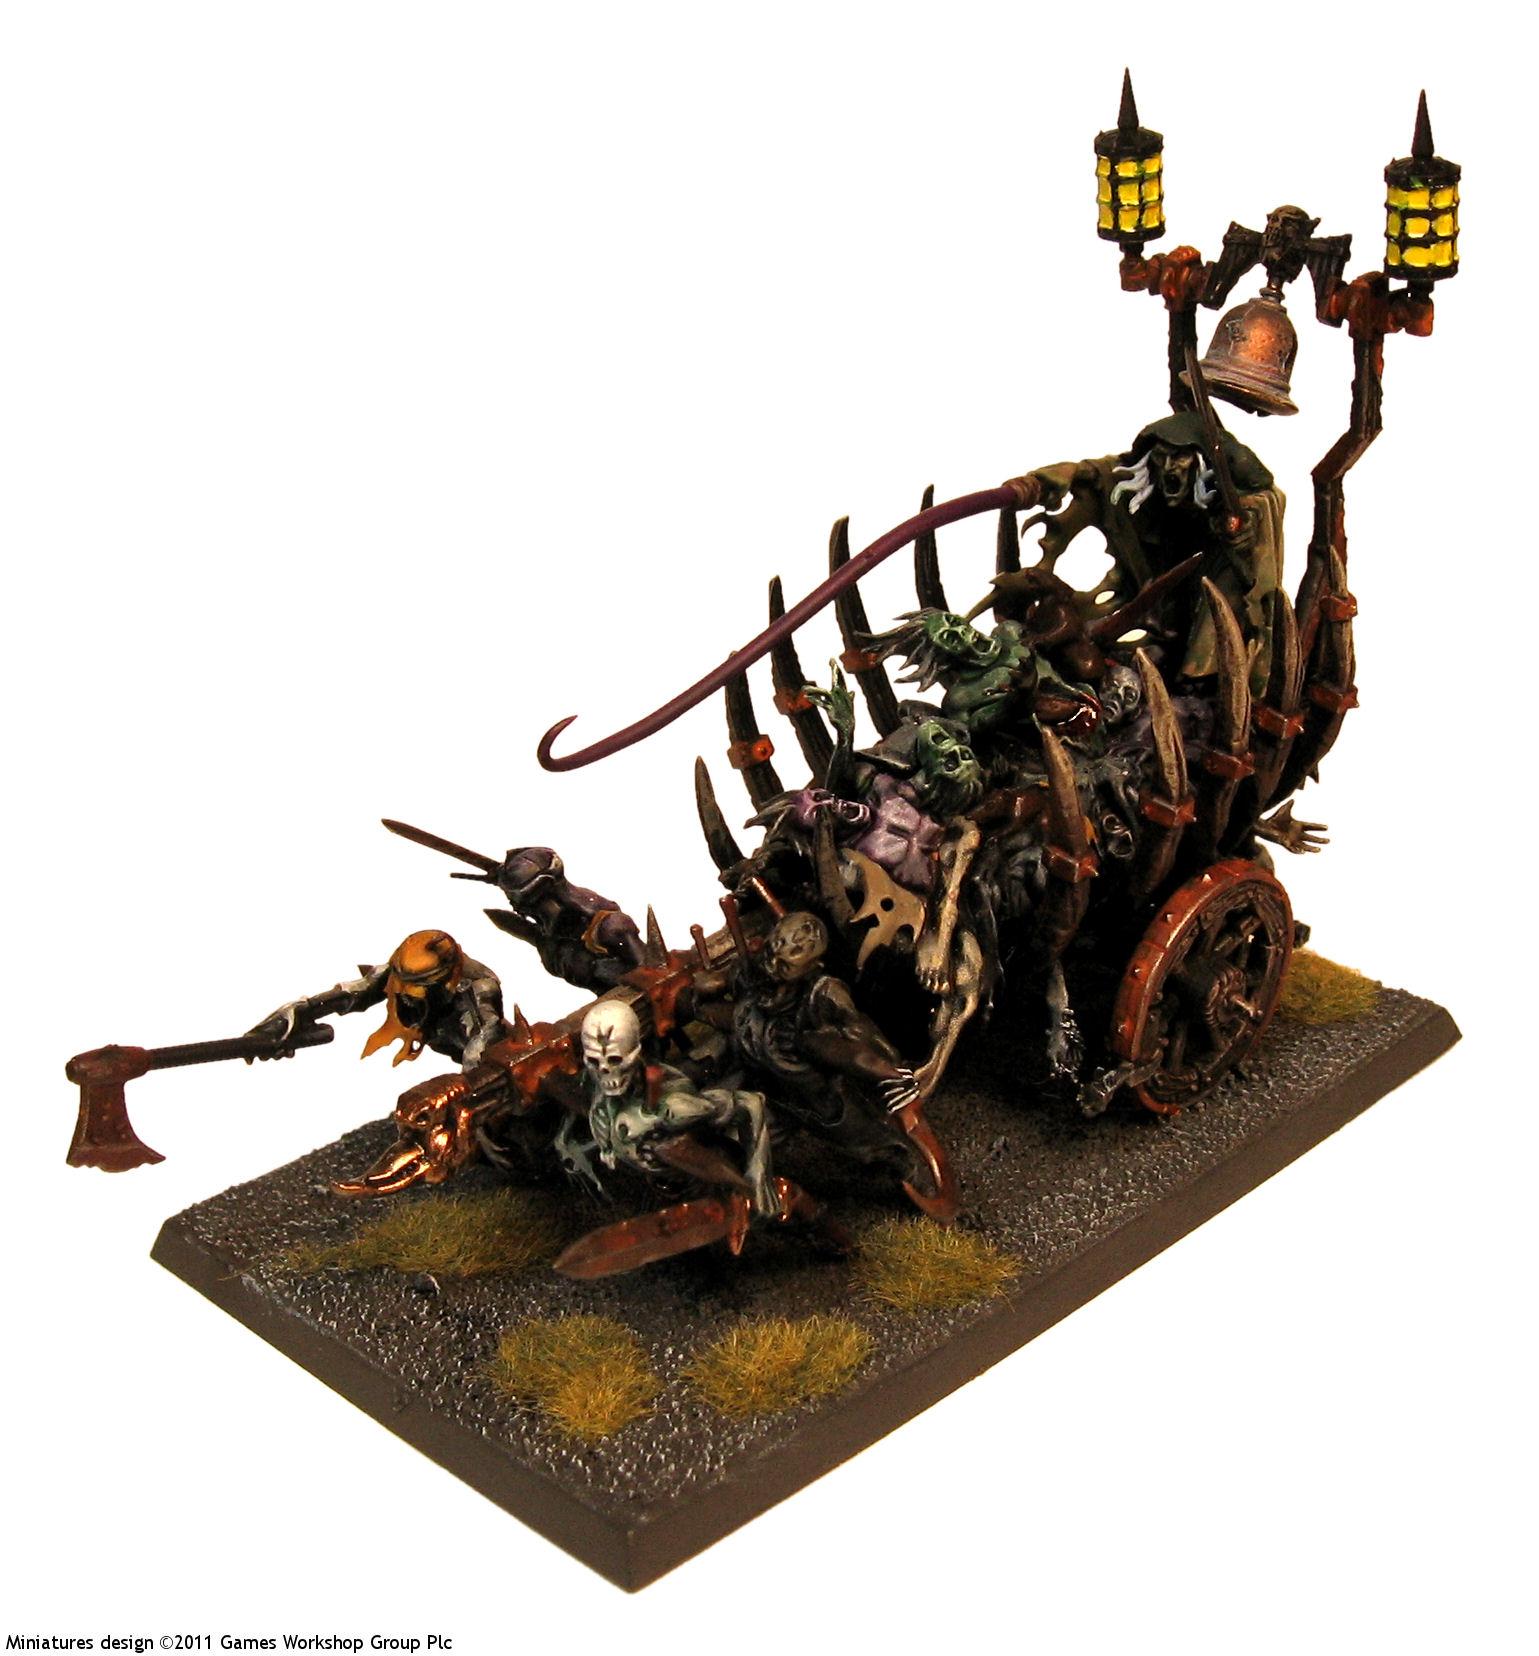 Corpse Cart, Cult, Dragon, Dungeons, Omega, Orcus, Precinct, Warhammer Fantasy